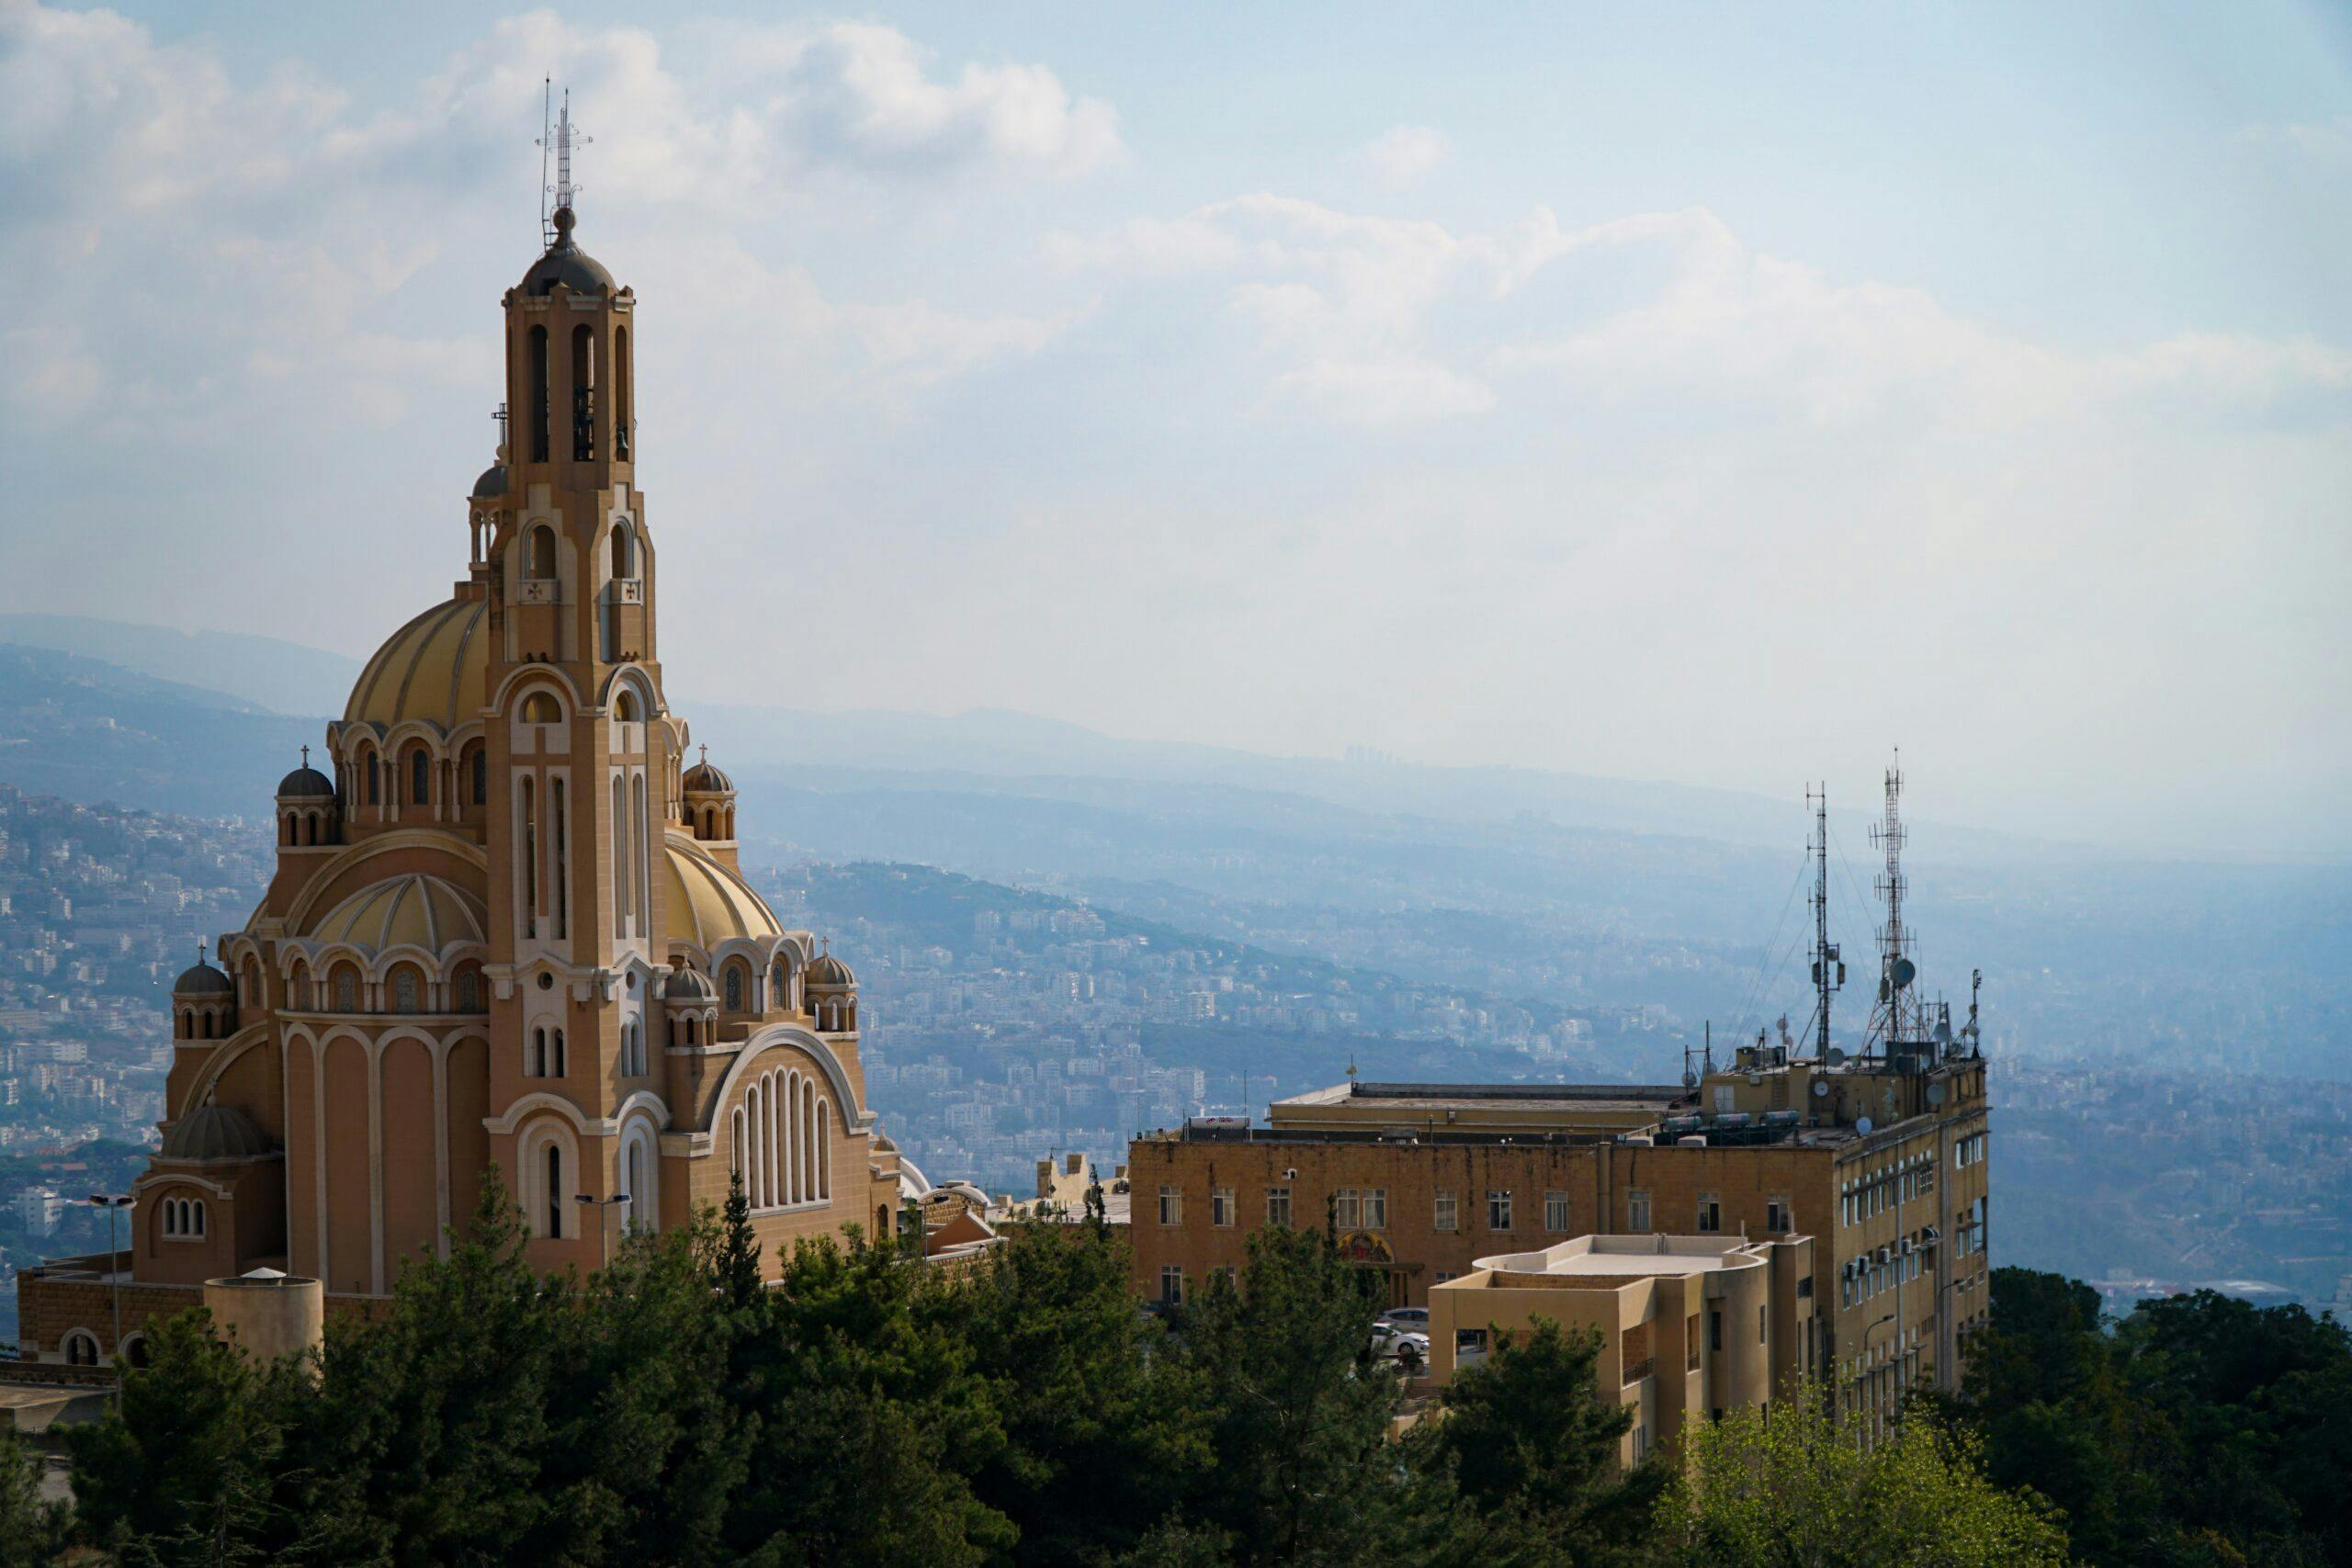 We're reimagining a fairer way to visit Lebanon